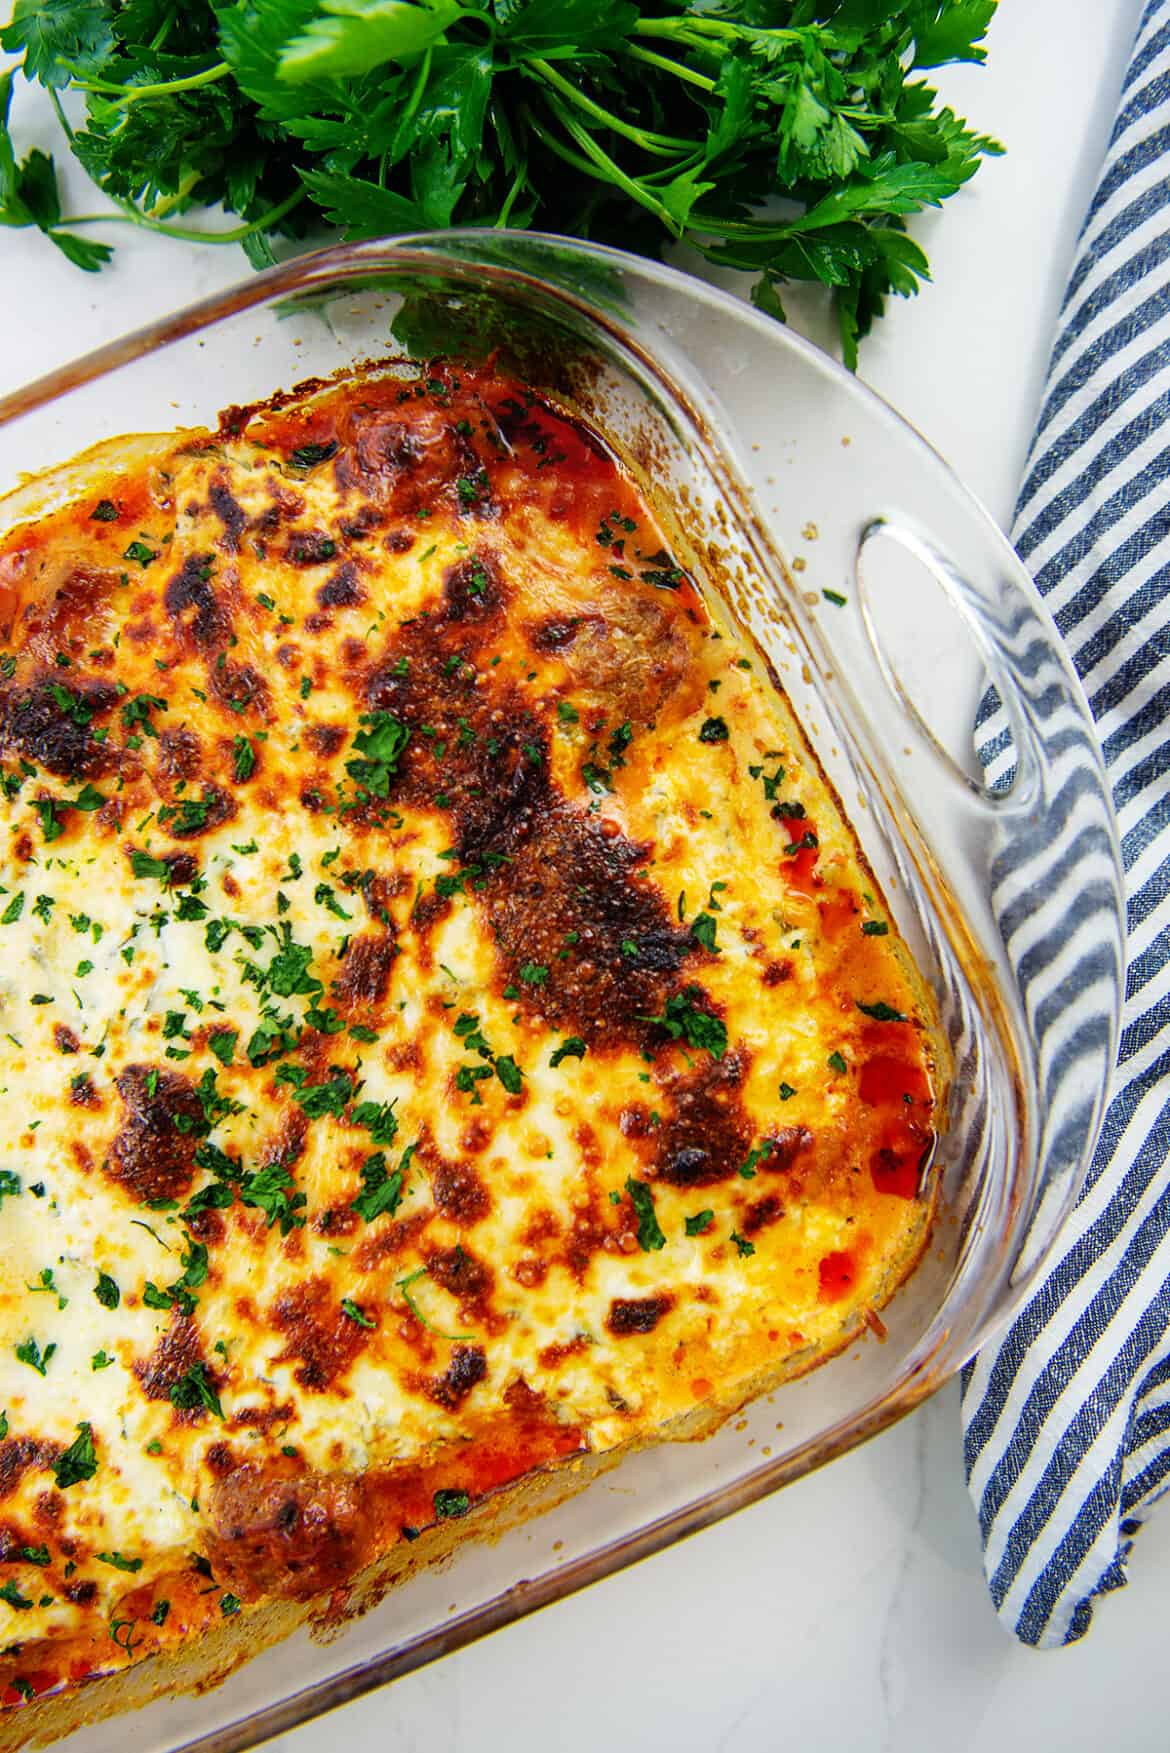 Easy Cheesy Keto Meatball Casserole Recipe | That Low Carb Life